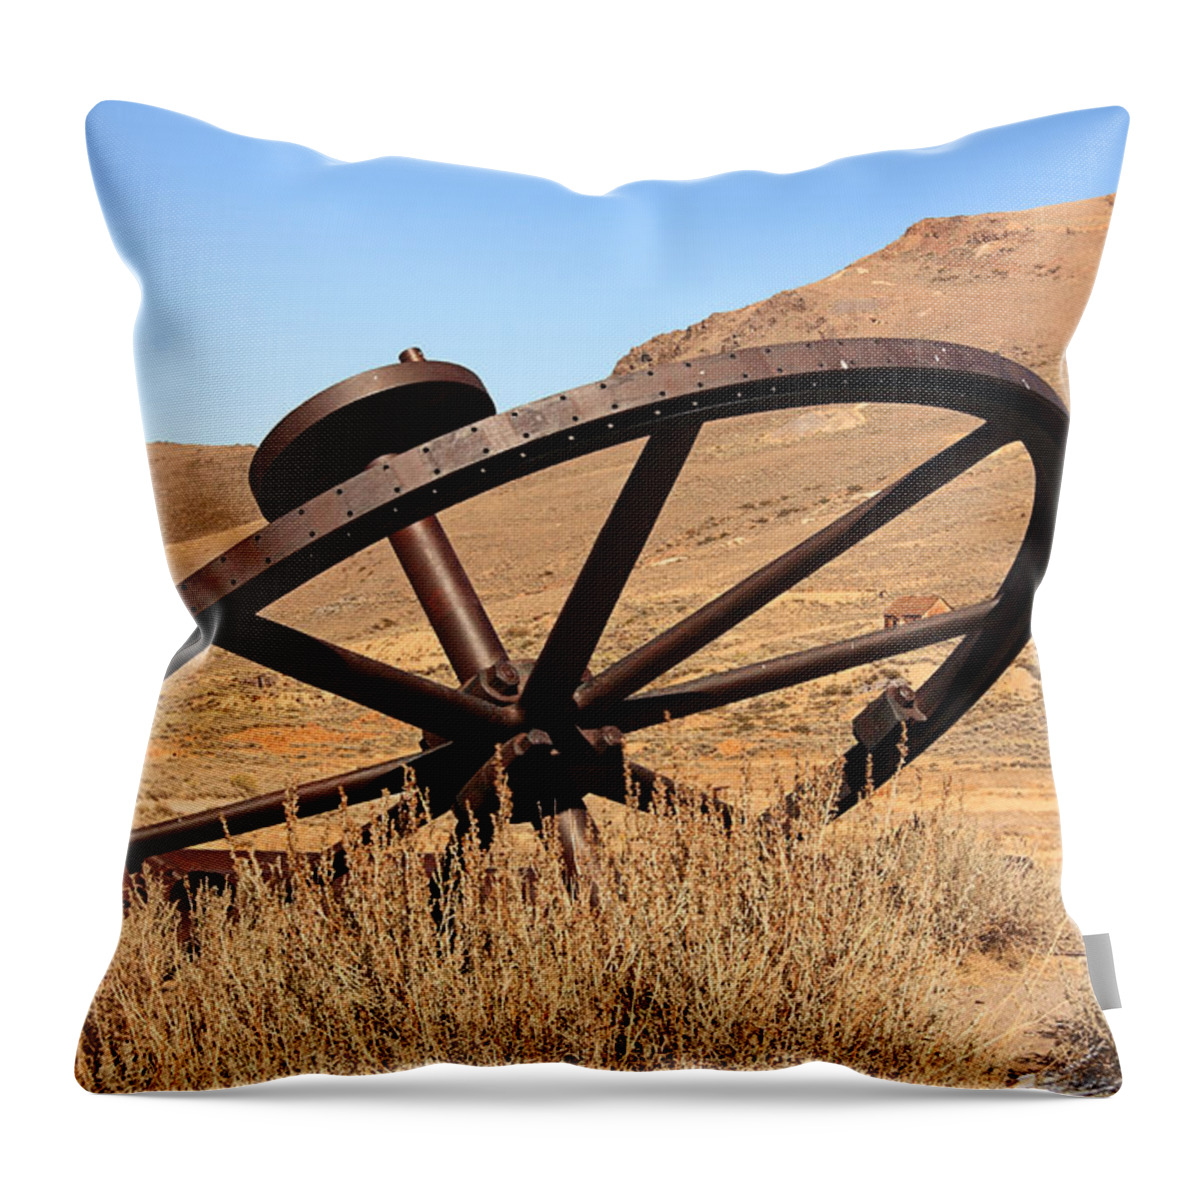 Bodie Ghost Town Throw Pillow featuring the photograph Industrial Wheel by Sue Leonard